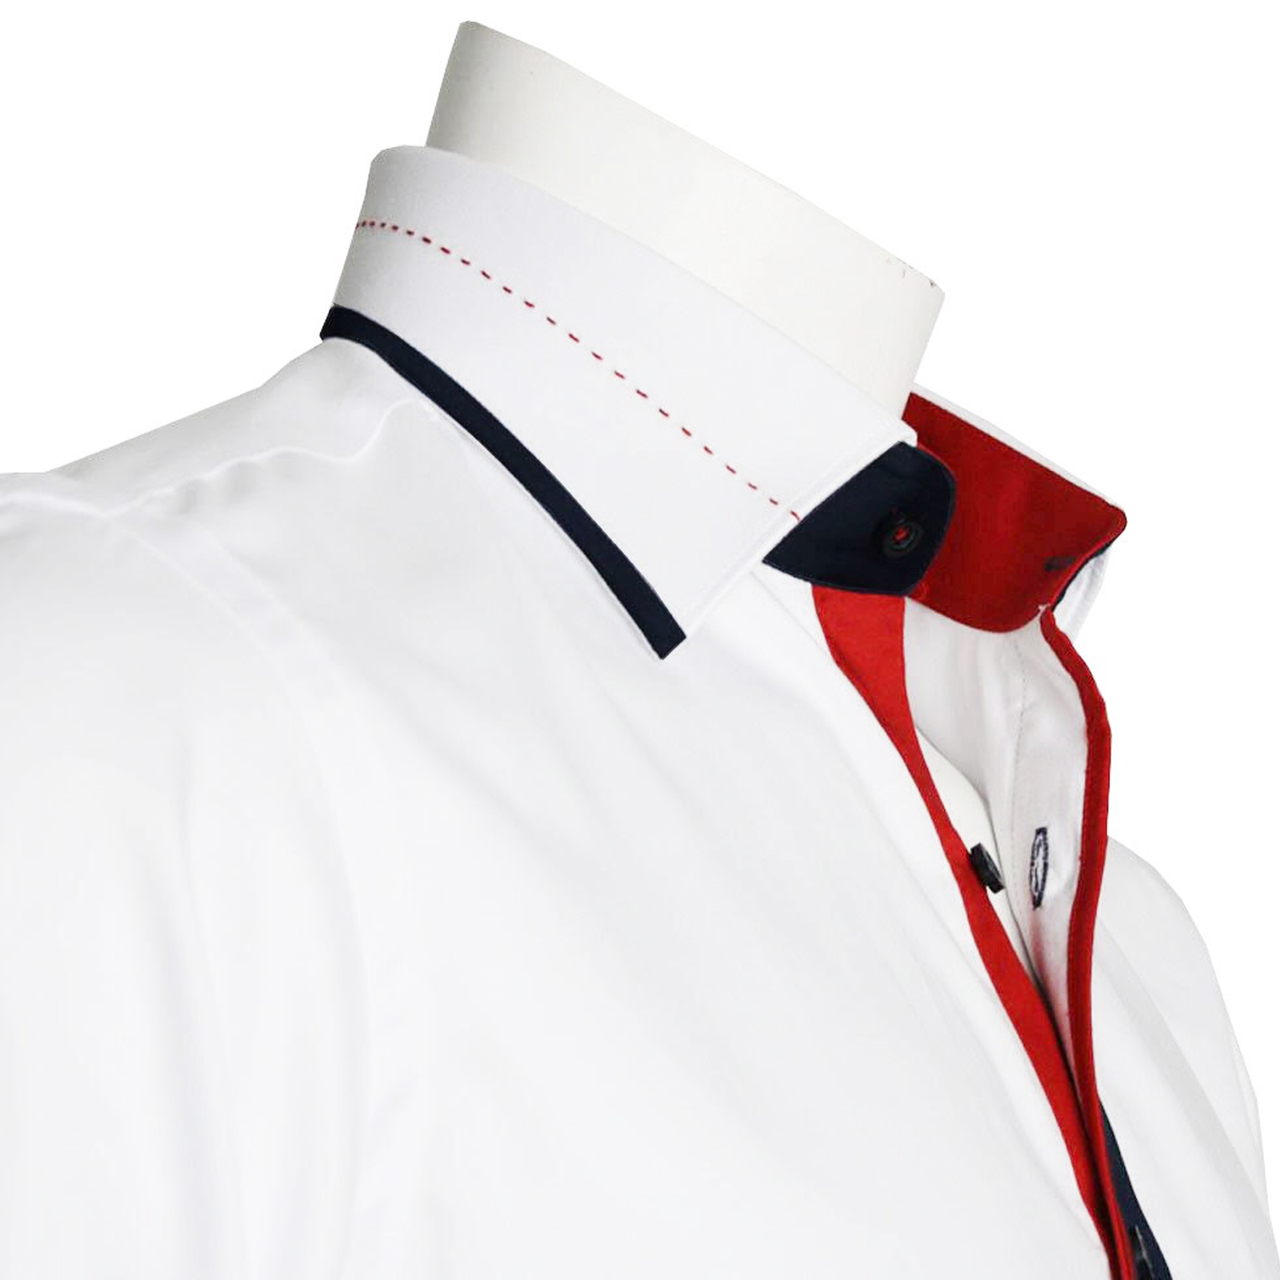 white and red shirt mens